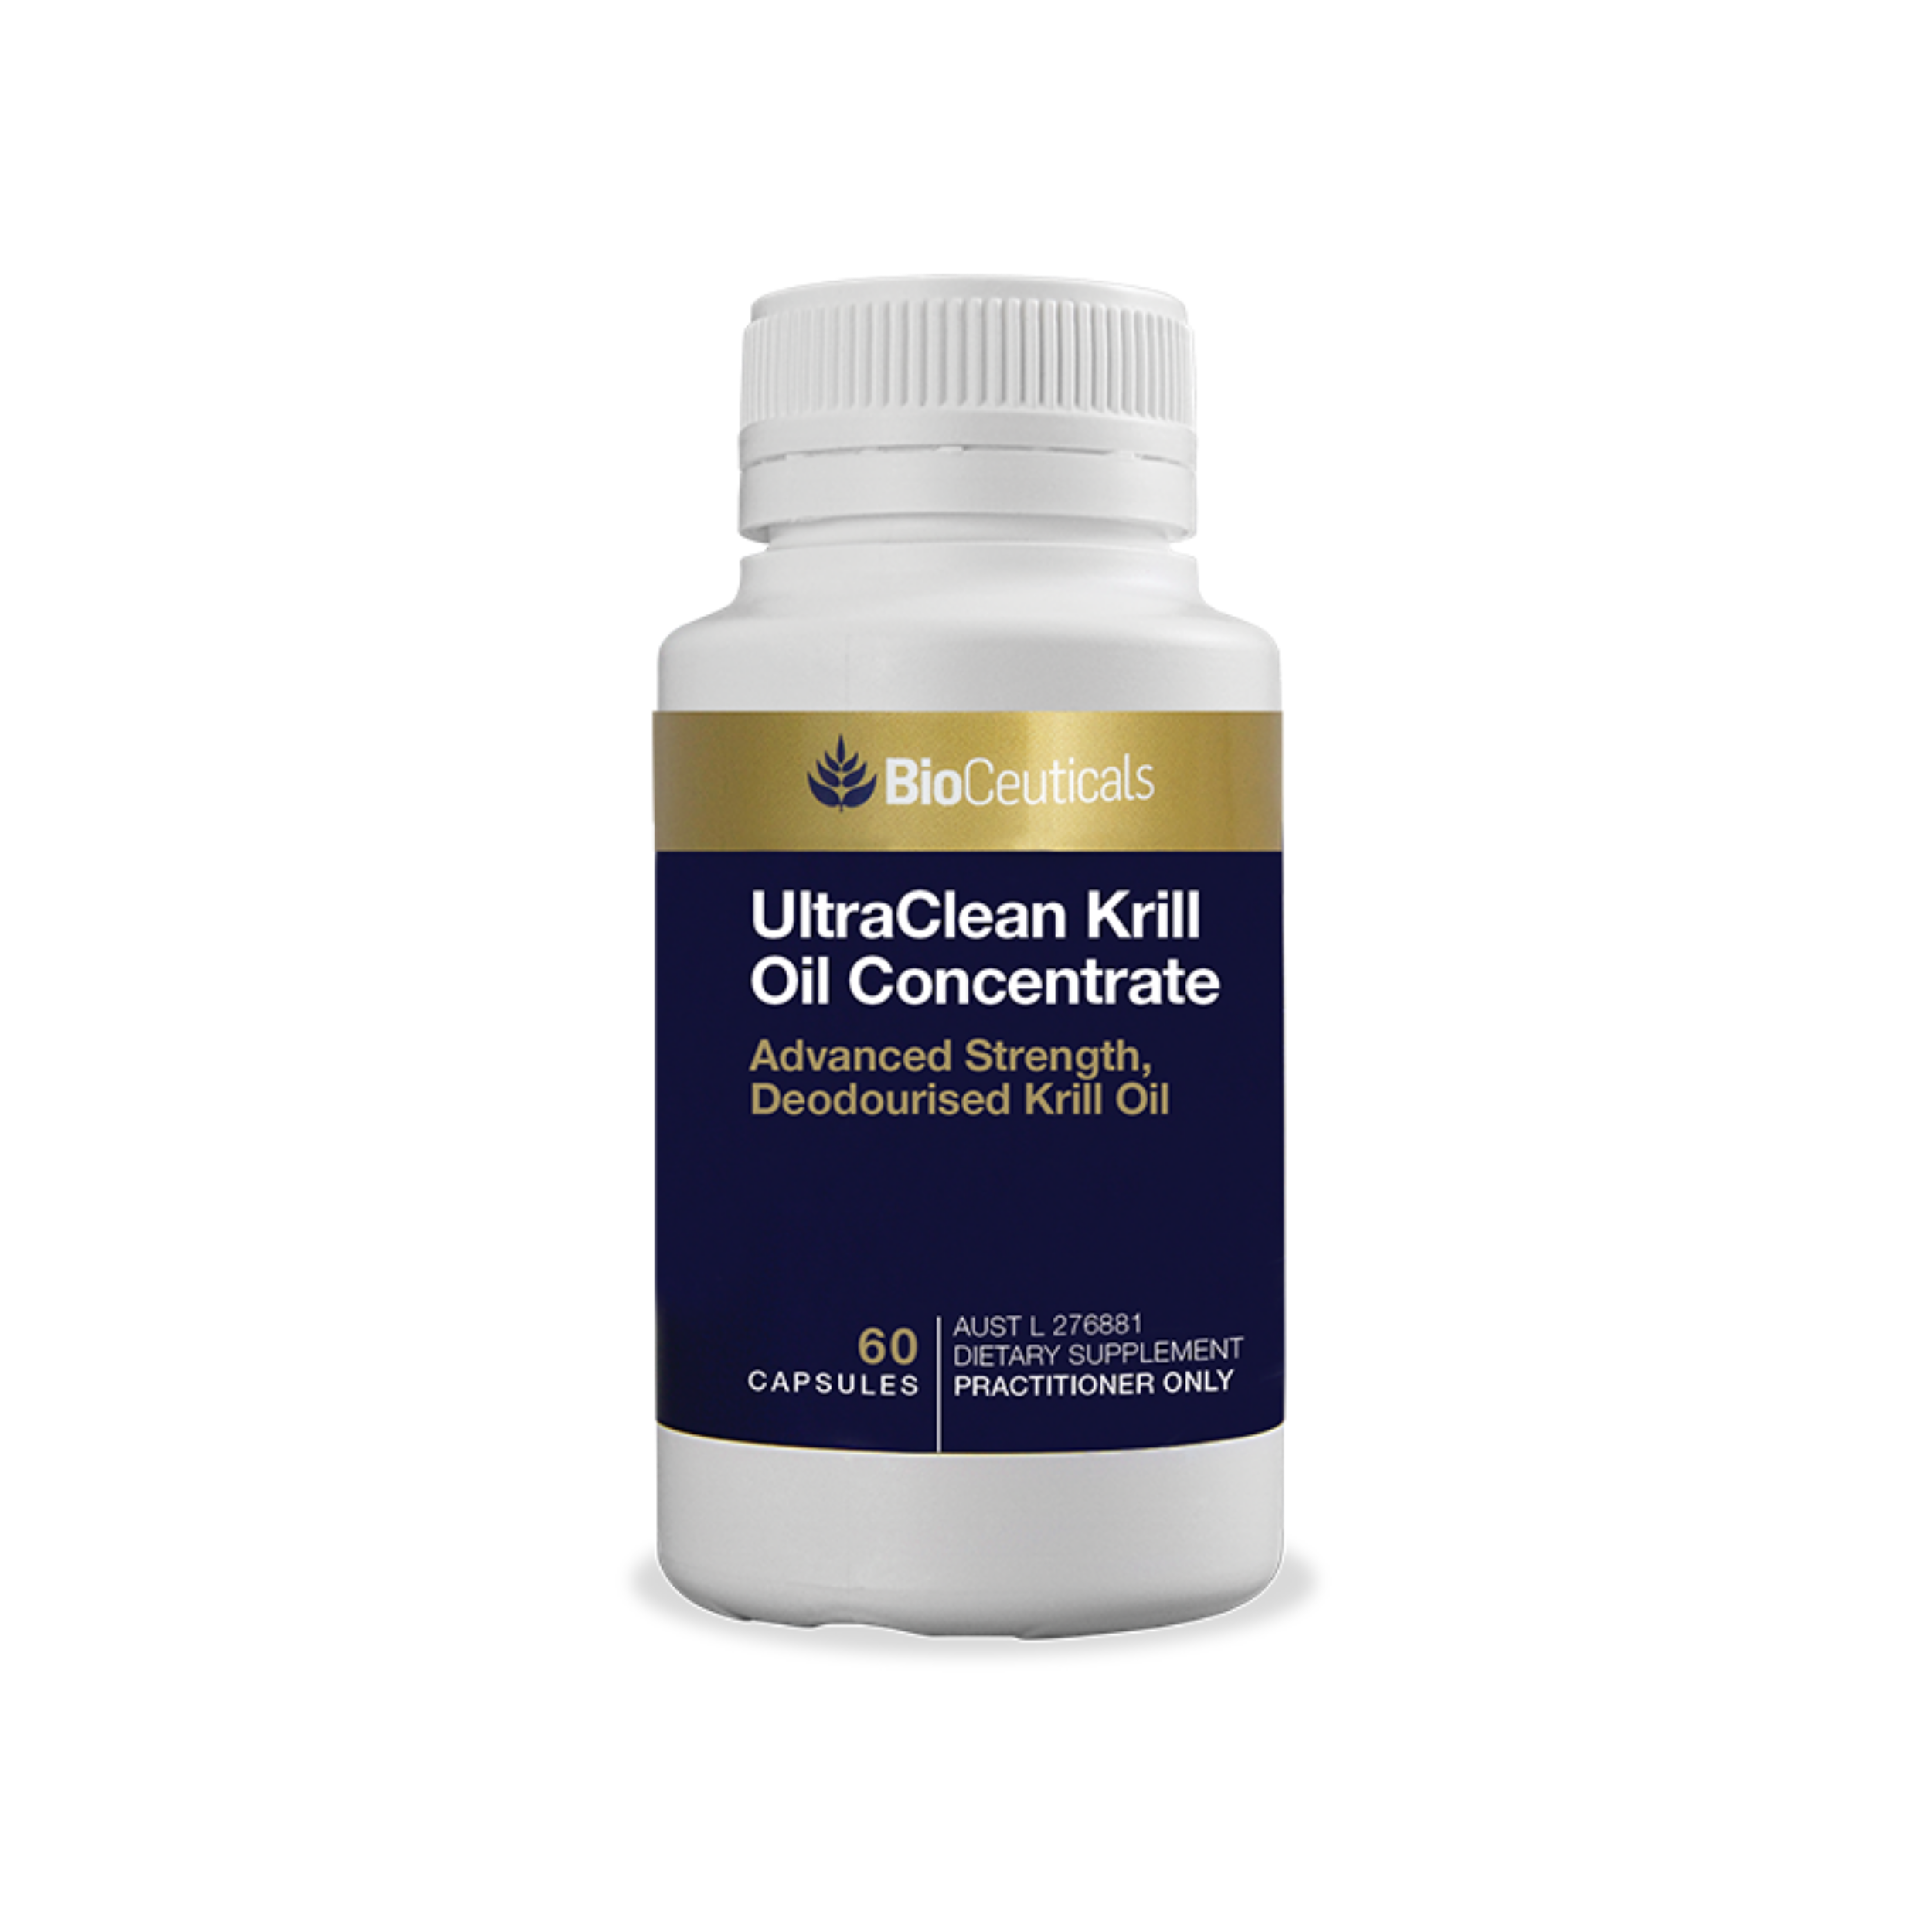 ioceuticals UltraClean Krill Oil Concentrate  60 Capsules